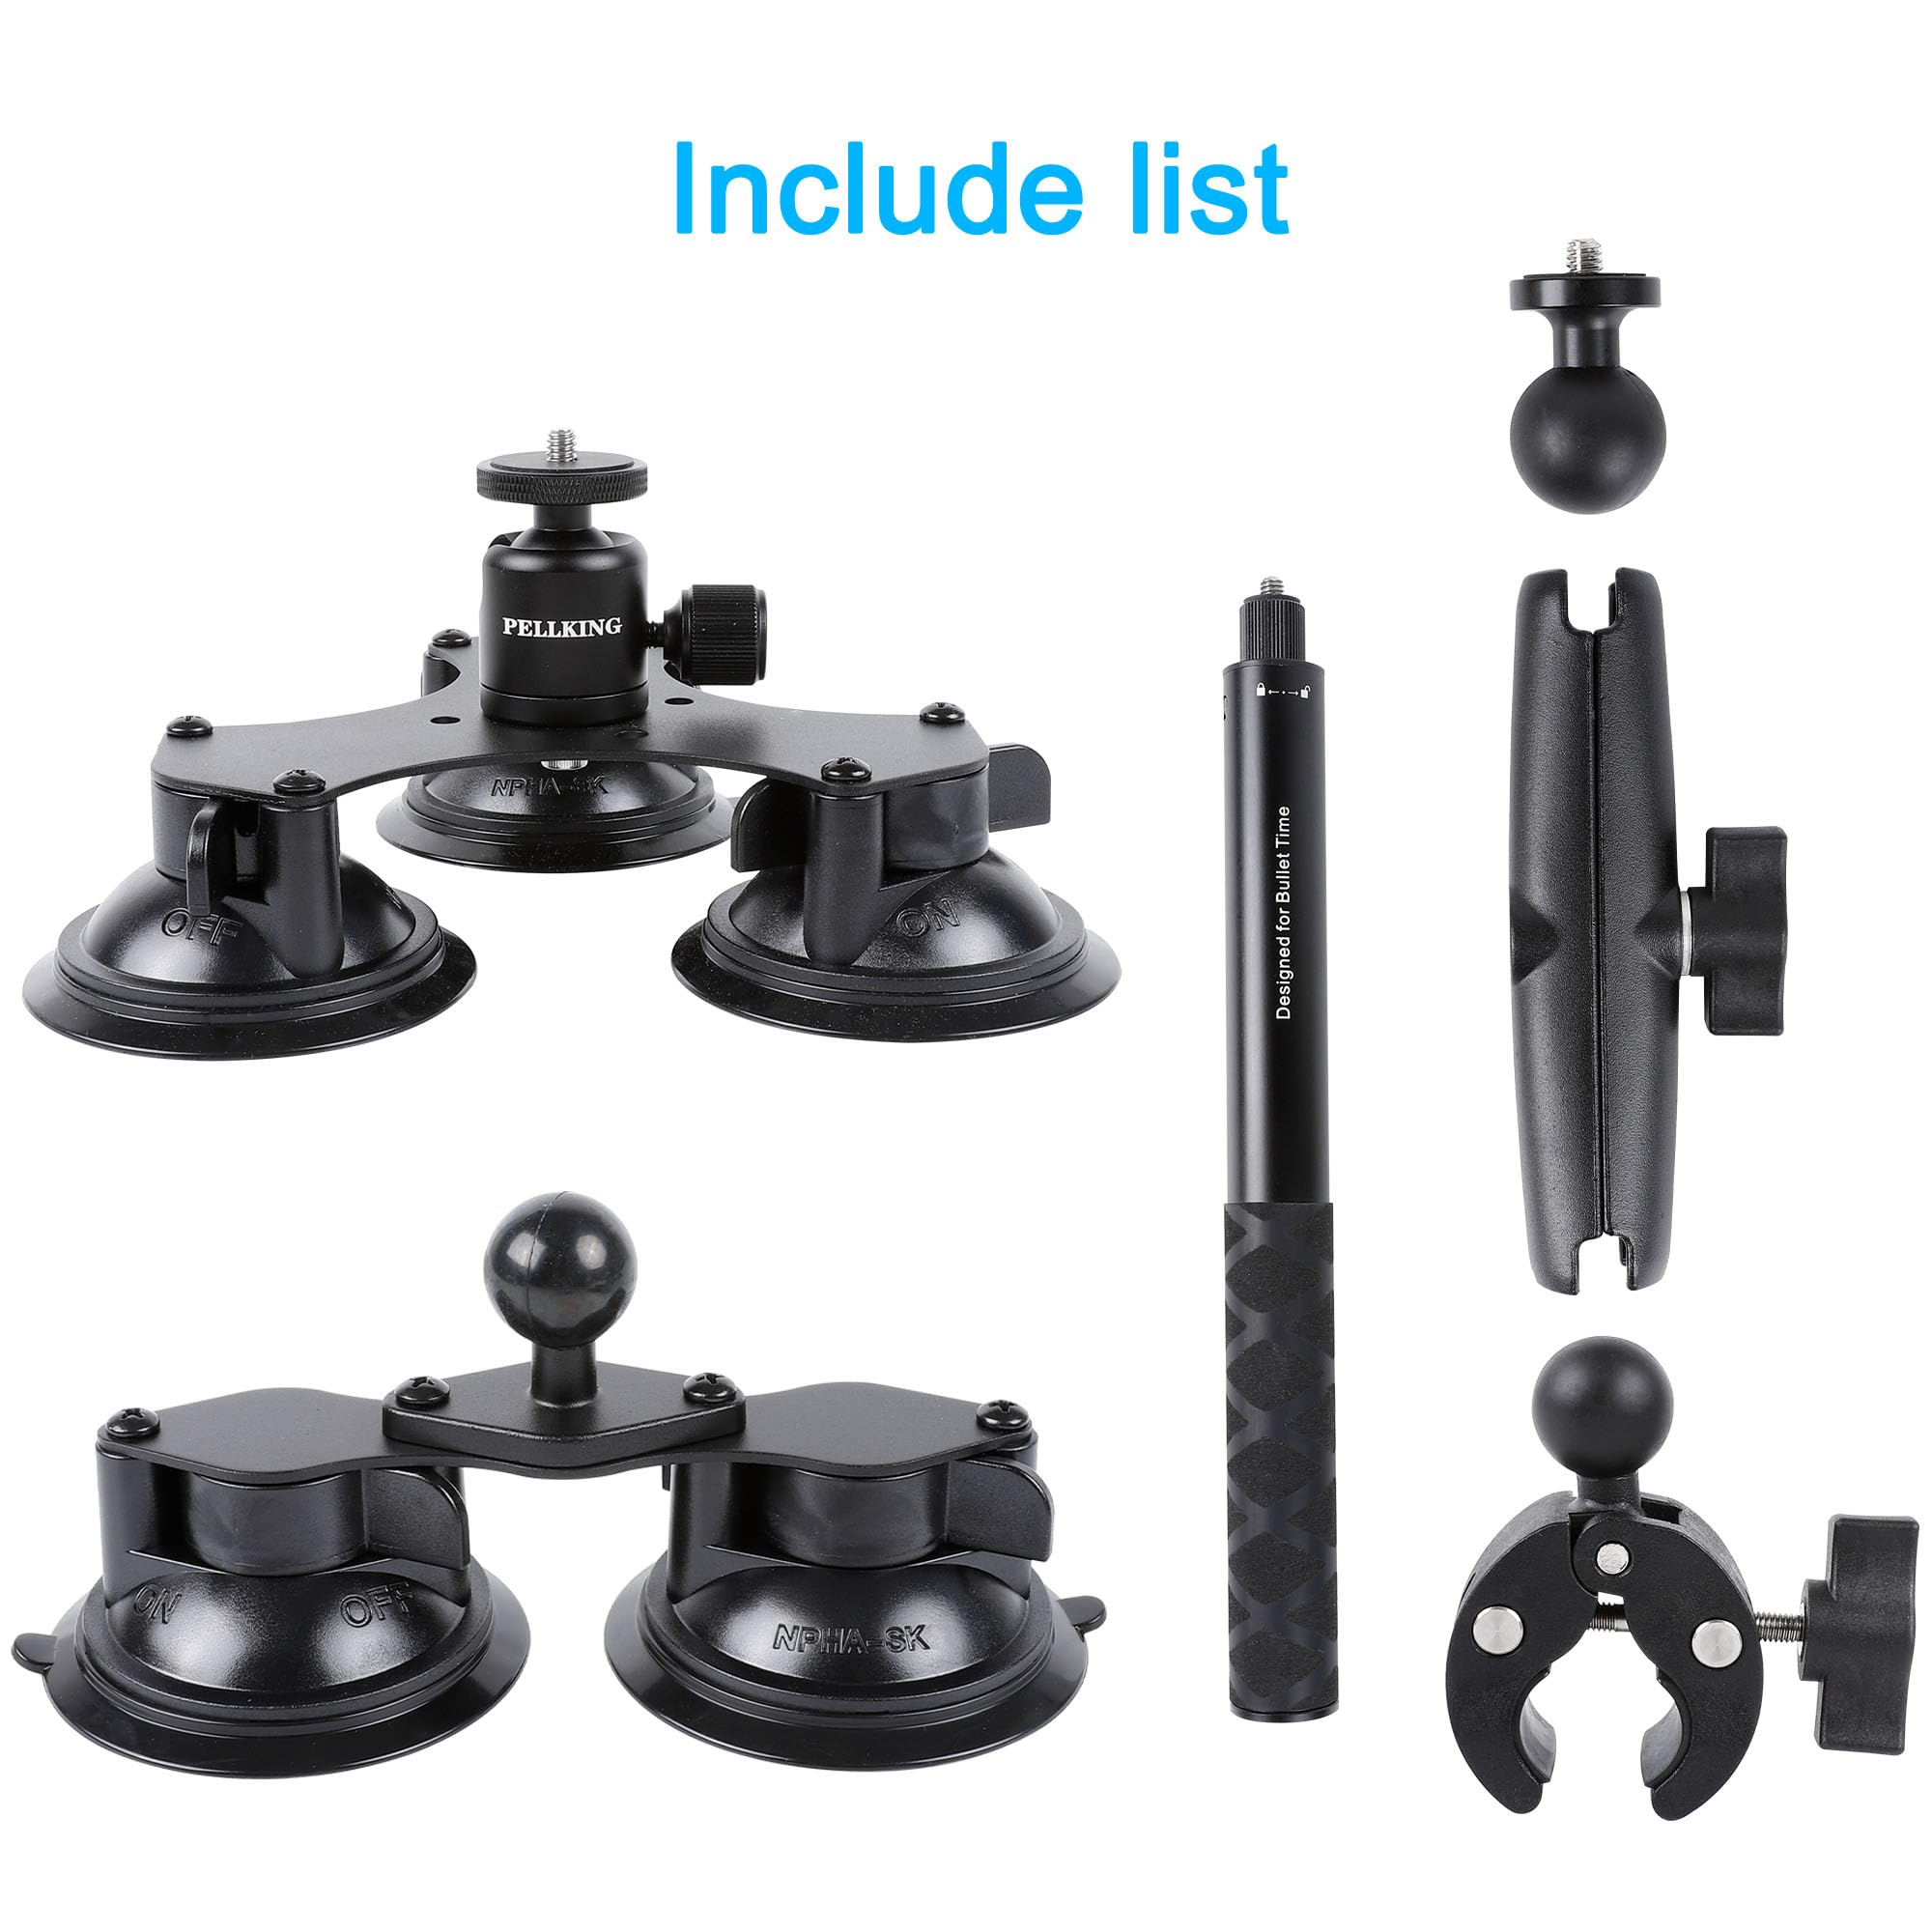 PellKing Suction Car Mount for Insta360 x4, x3, x2, x,One RS,R Compatible with GoPro Max Camera 5 in 1 Suction Mount Kit for Action Cameras (Includes 44.9-inch Selfie Stick)